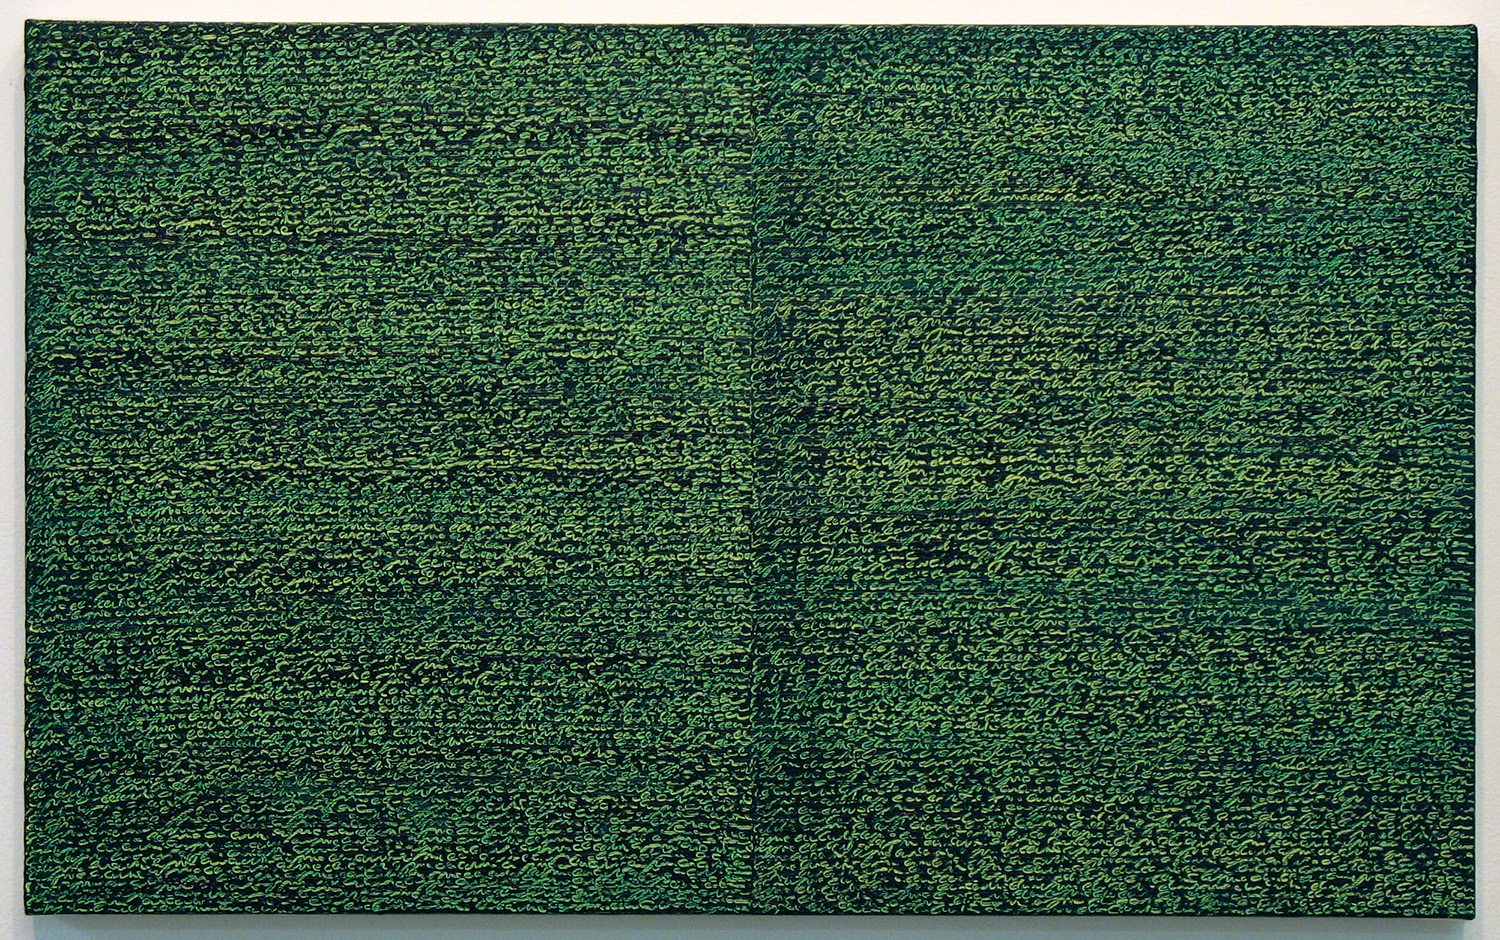 Open Book -yellow-green-<br>oil and amber on canvas over panel, 37 x 60 cm, 2008